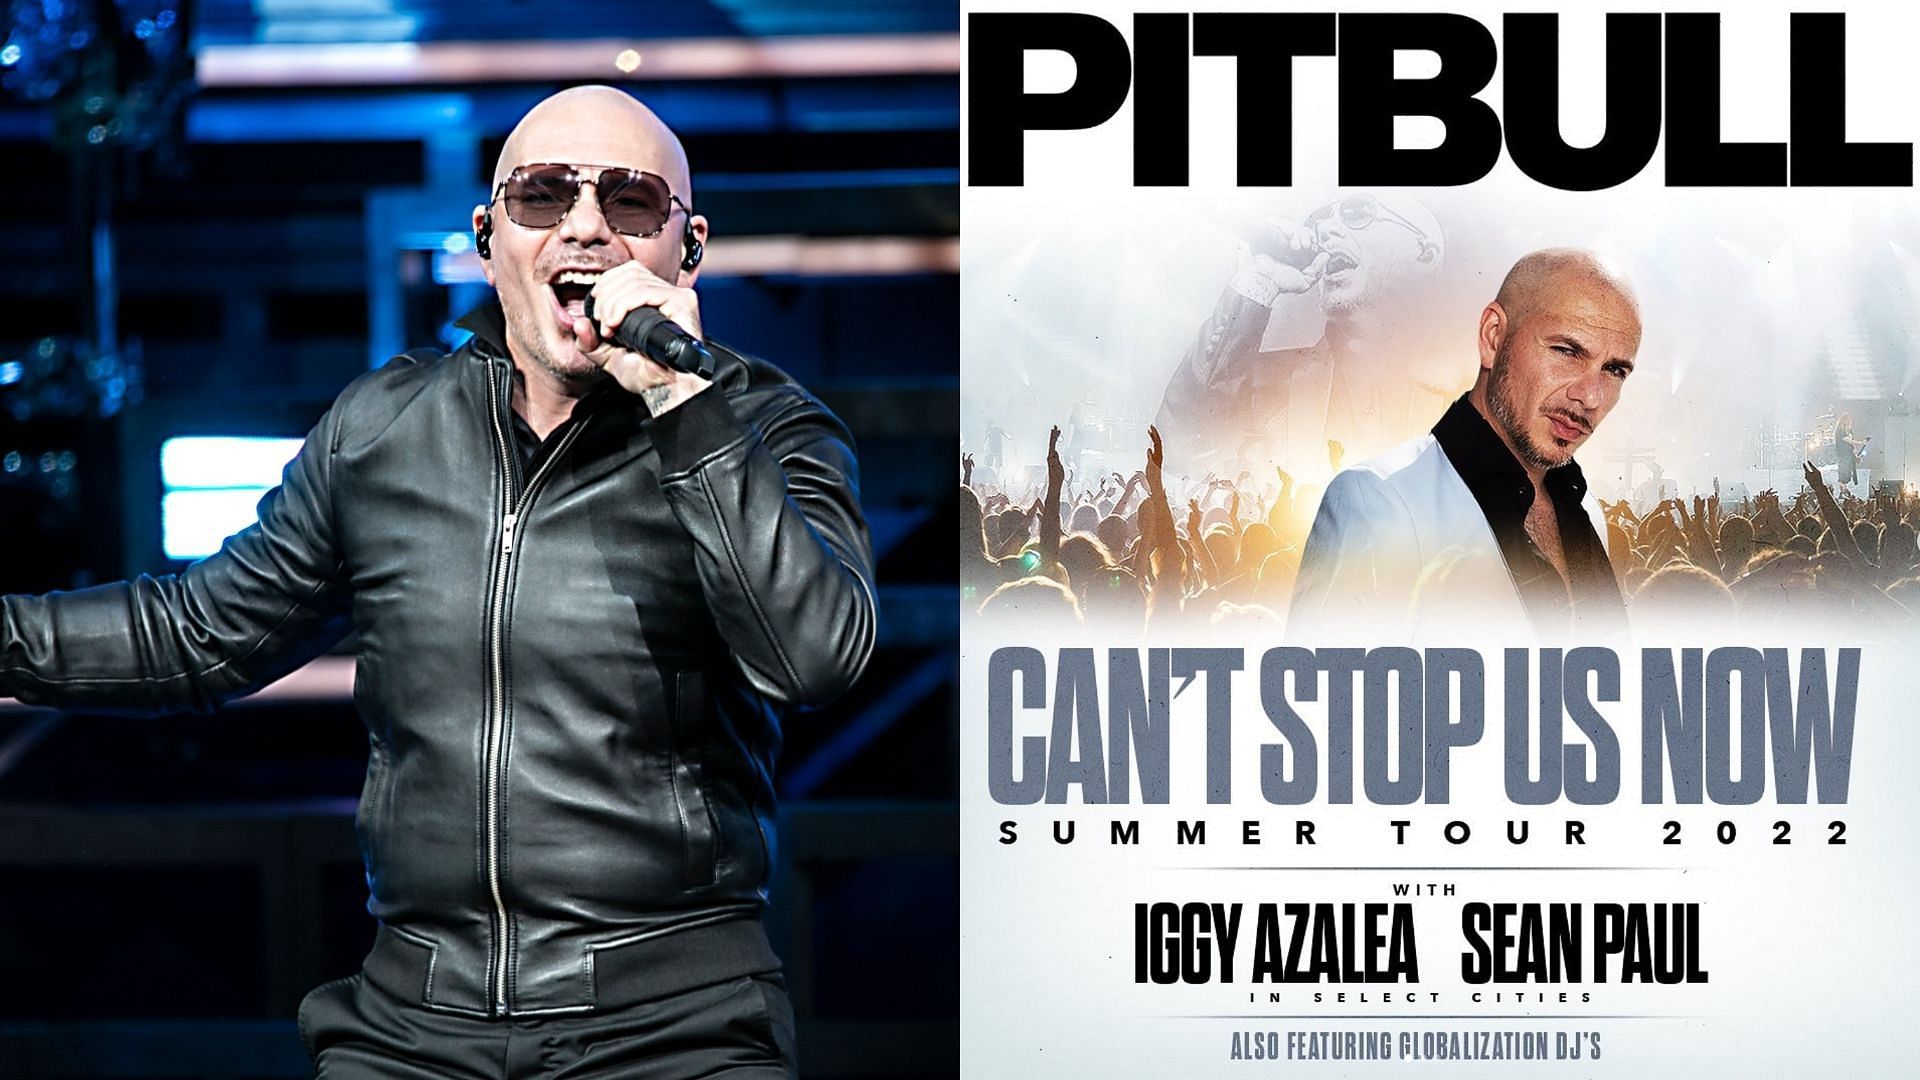 Pitbull 'Can’t Stop Us Now' Tour ft. Iggy Azalea 2022 tickets Where to